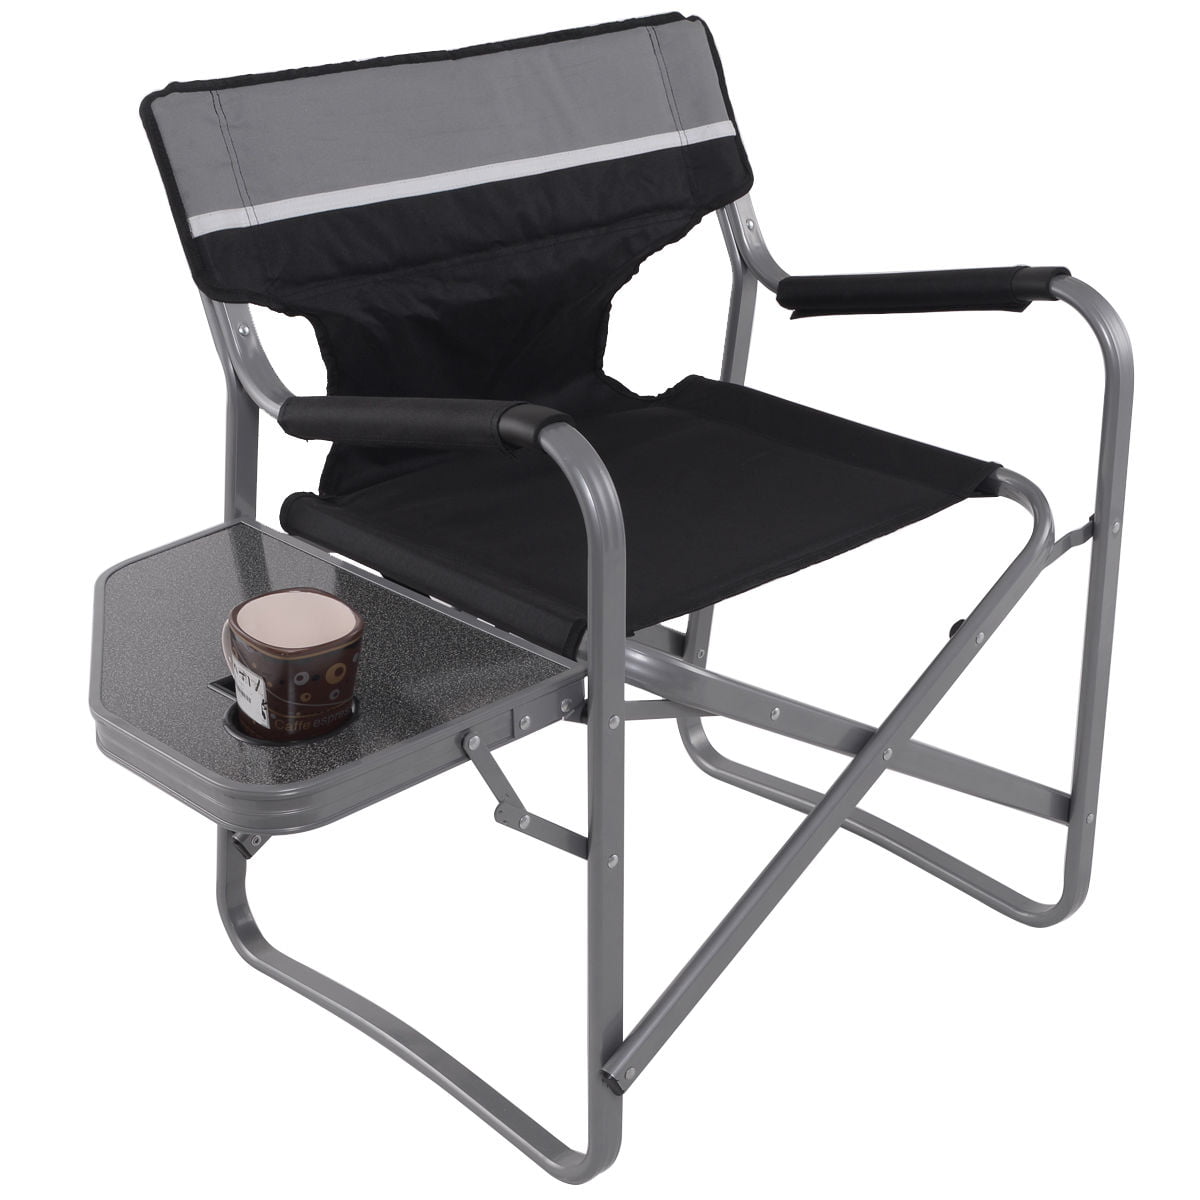 folding chair cup holder